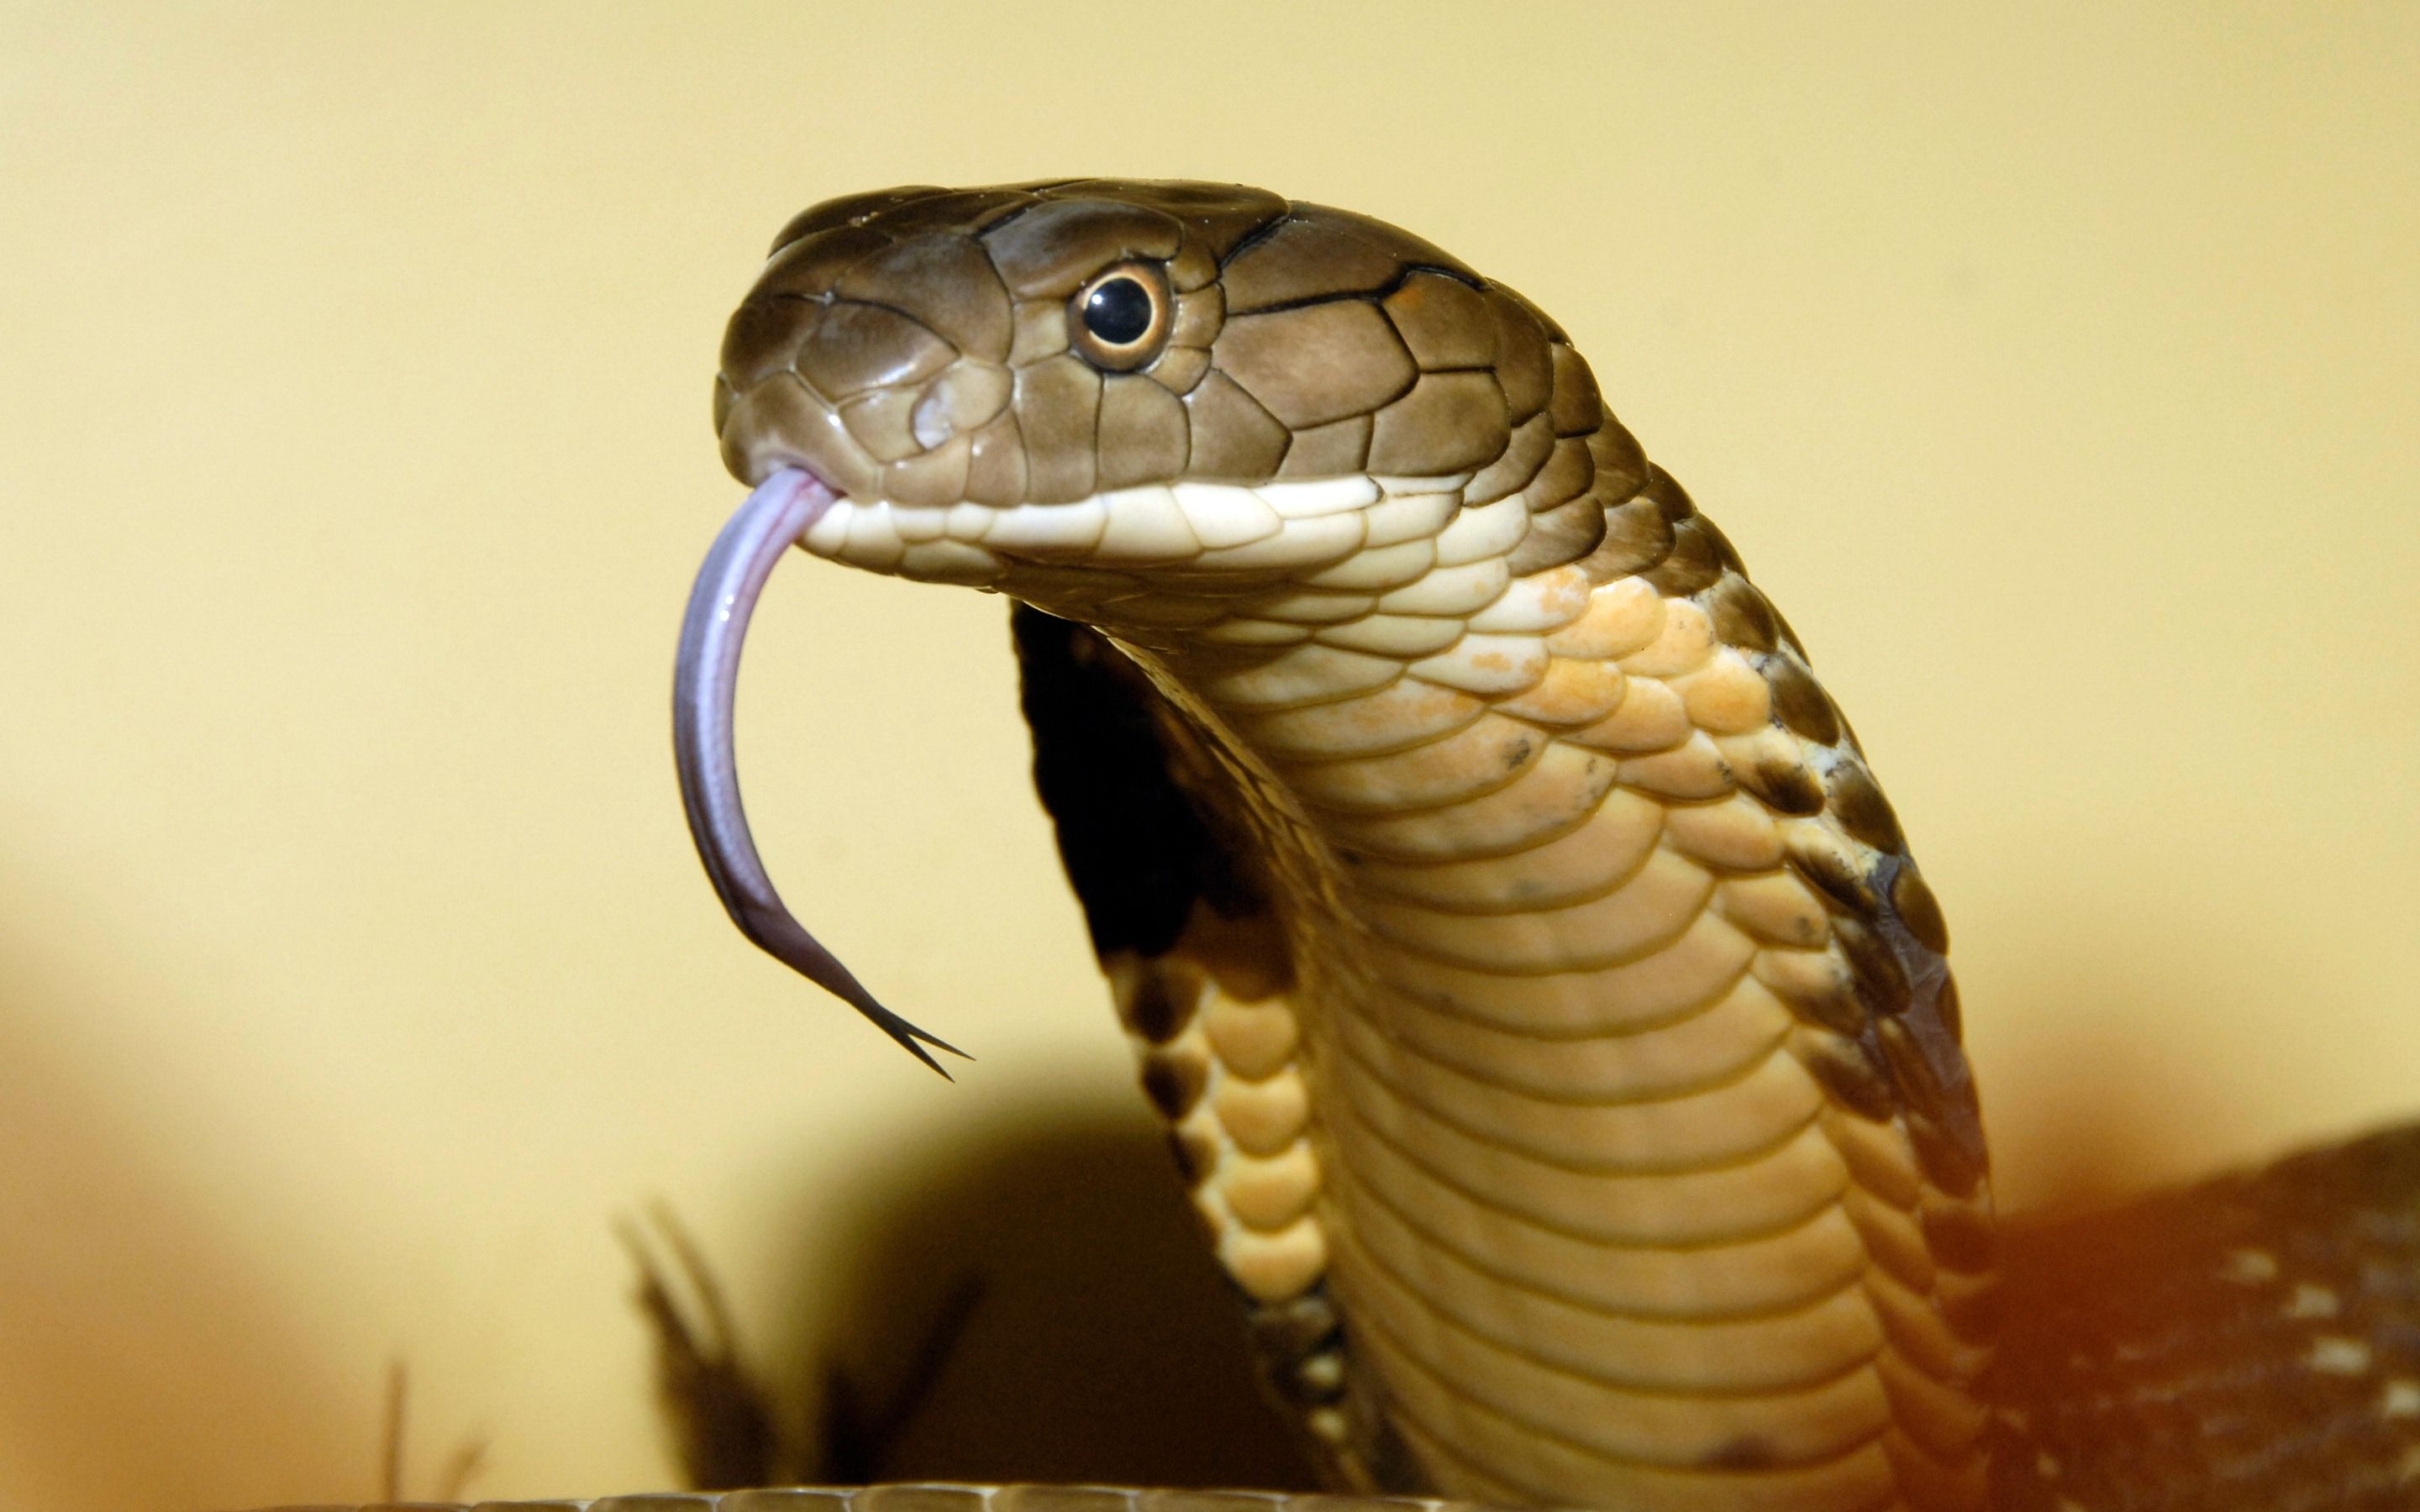 King Cobra Backgrounds Wallpapers 45137.